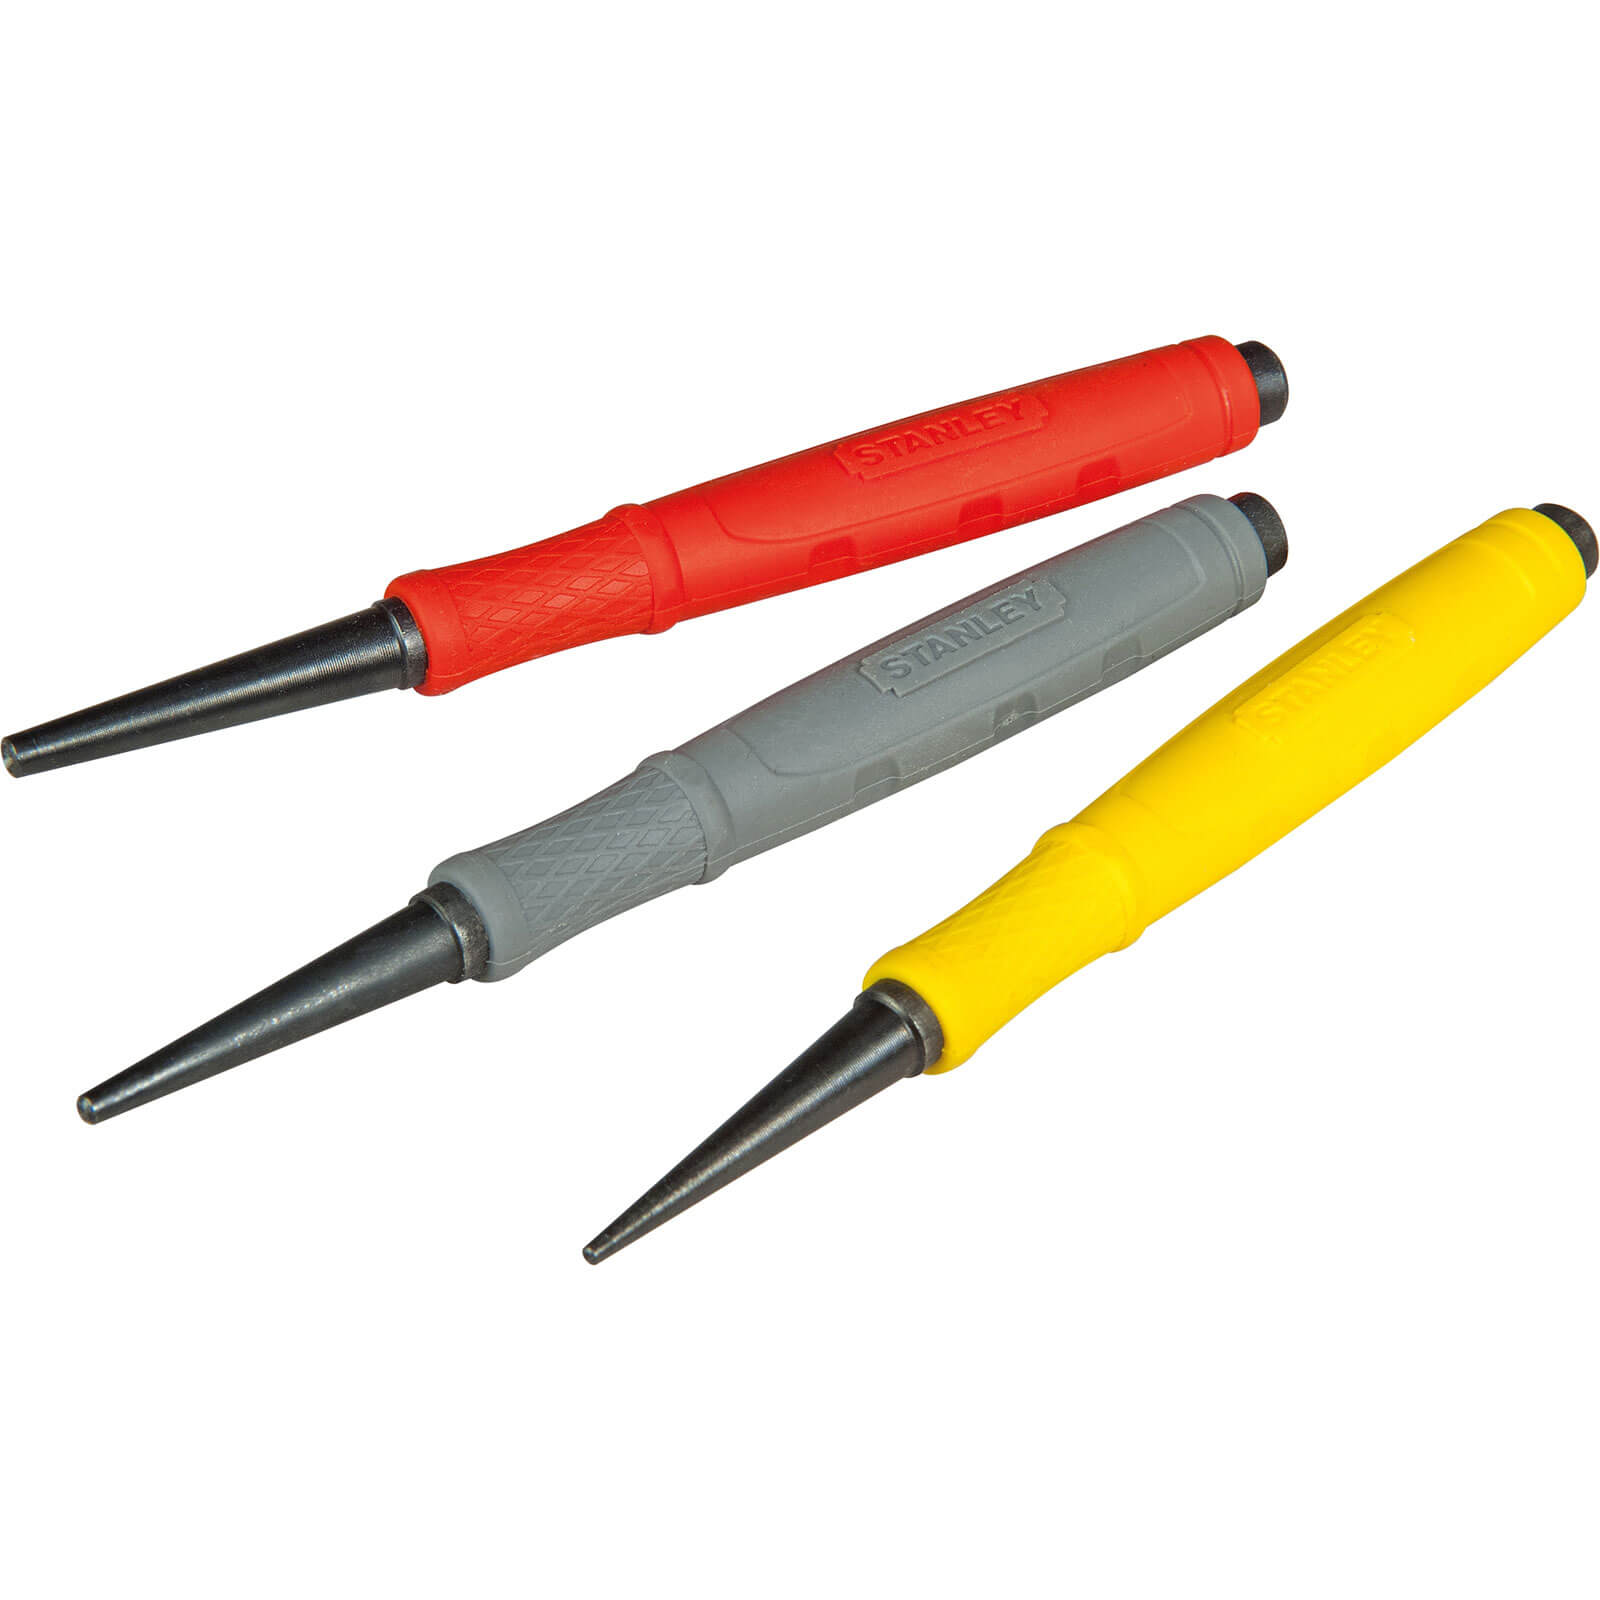 Image of Stanley 3 Piece Dynagrip Nail Punch Set